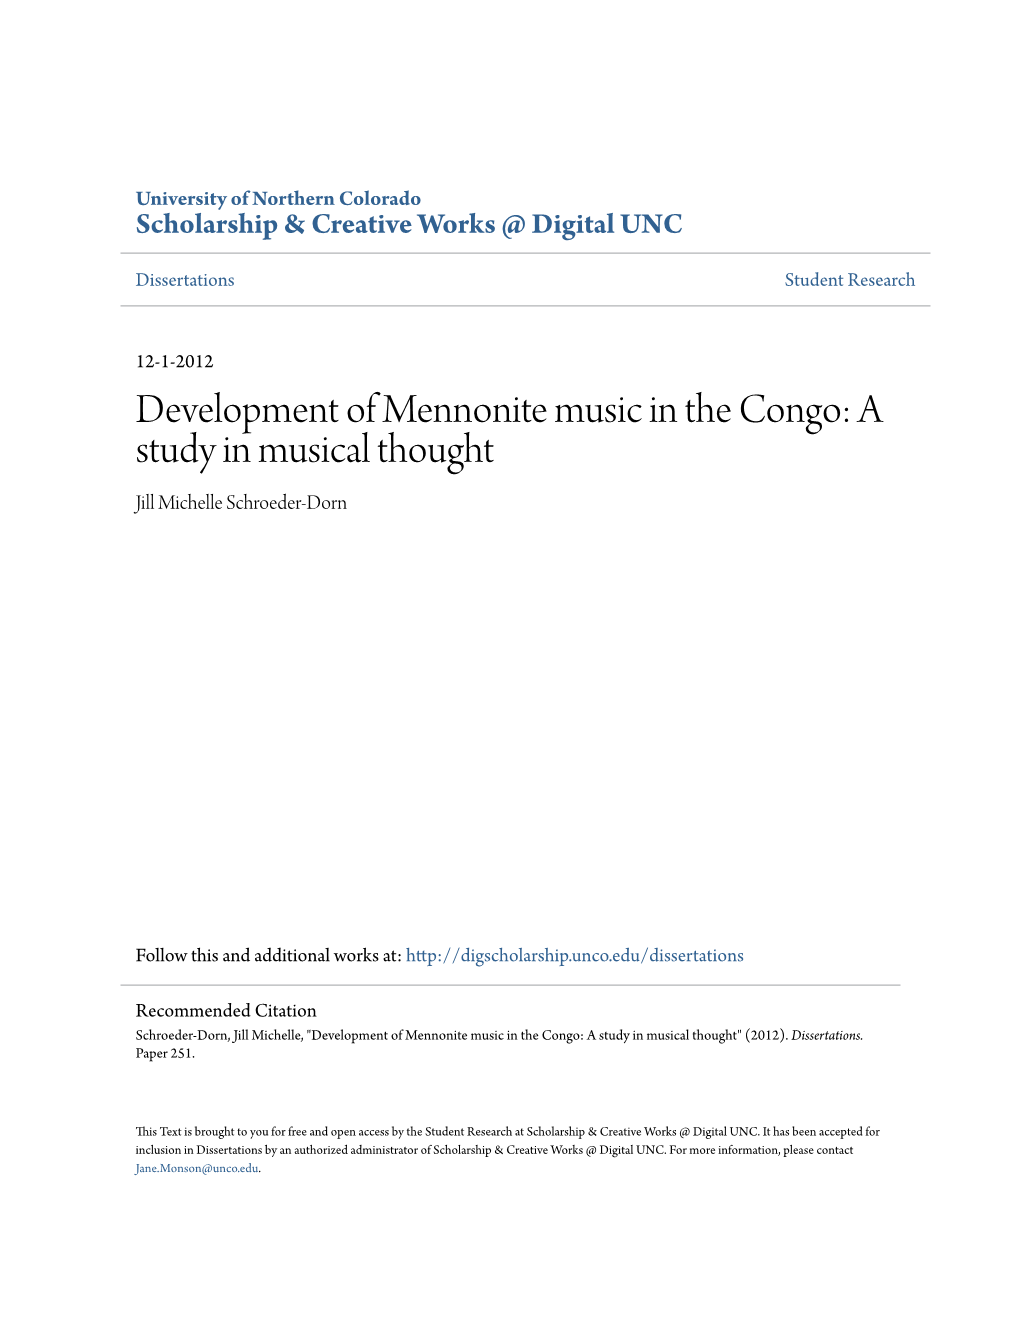 Development of Mennonite Music in the Congo: a Study in Musical Thought Jill Michelle Schroeder-Dorn